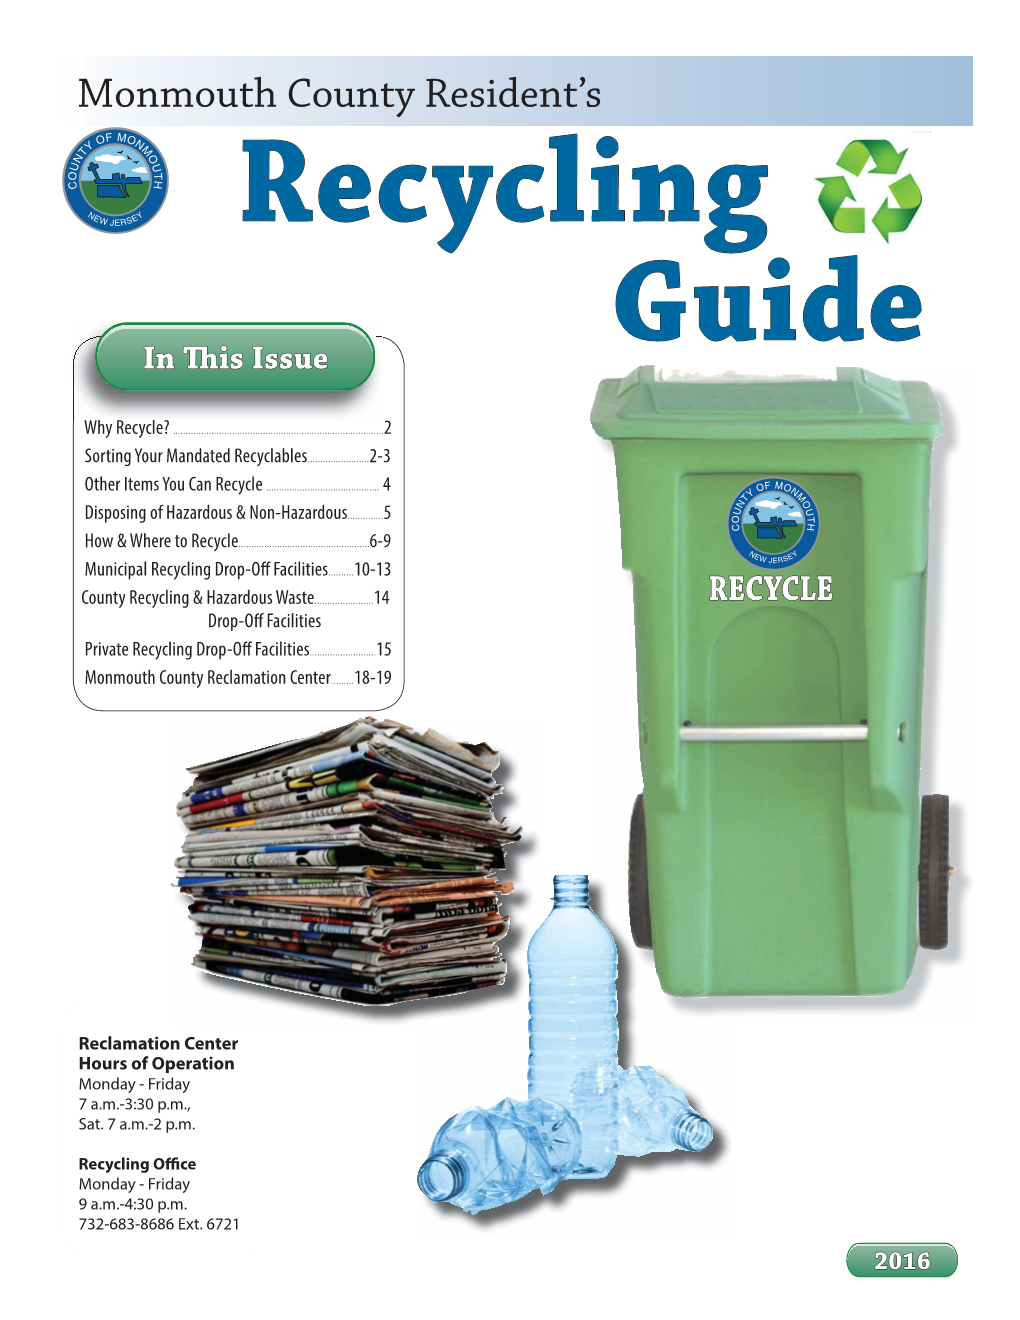 Monmouth County Recycling Guide